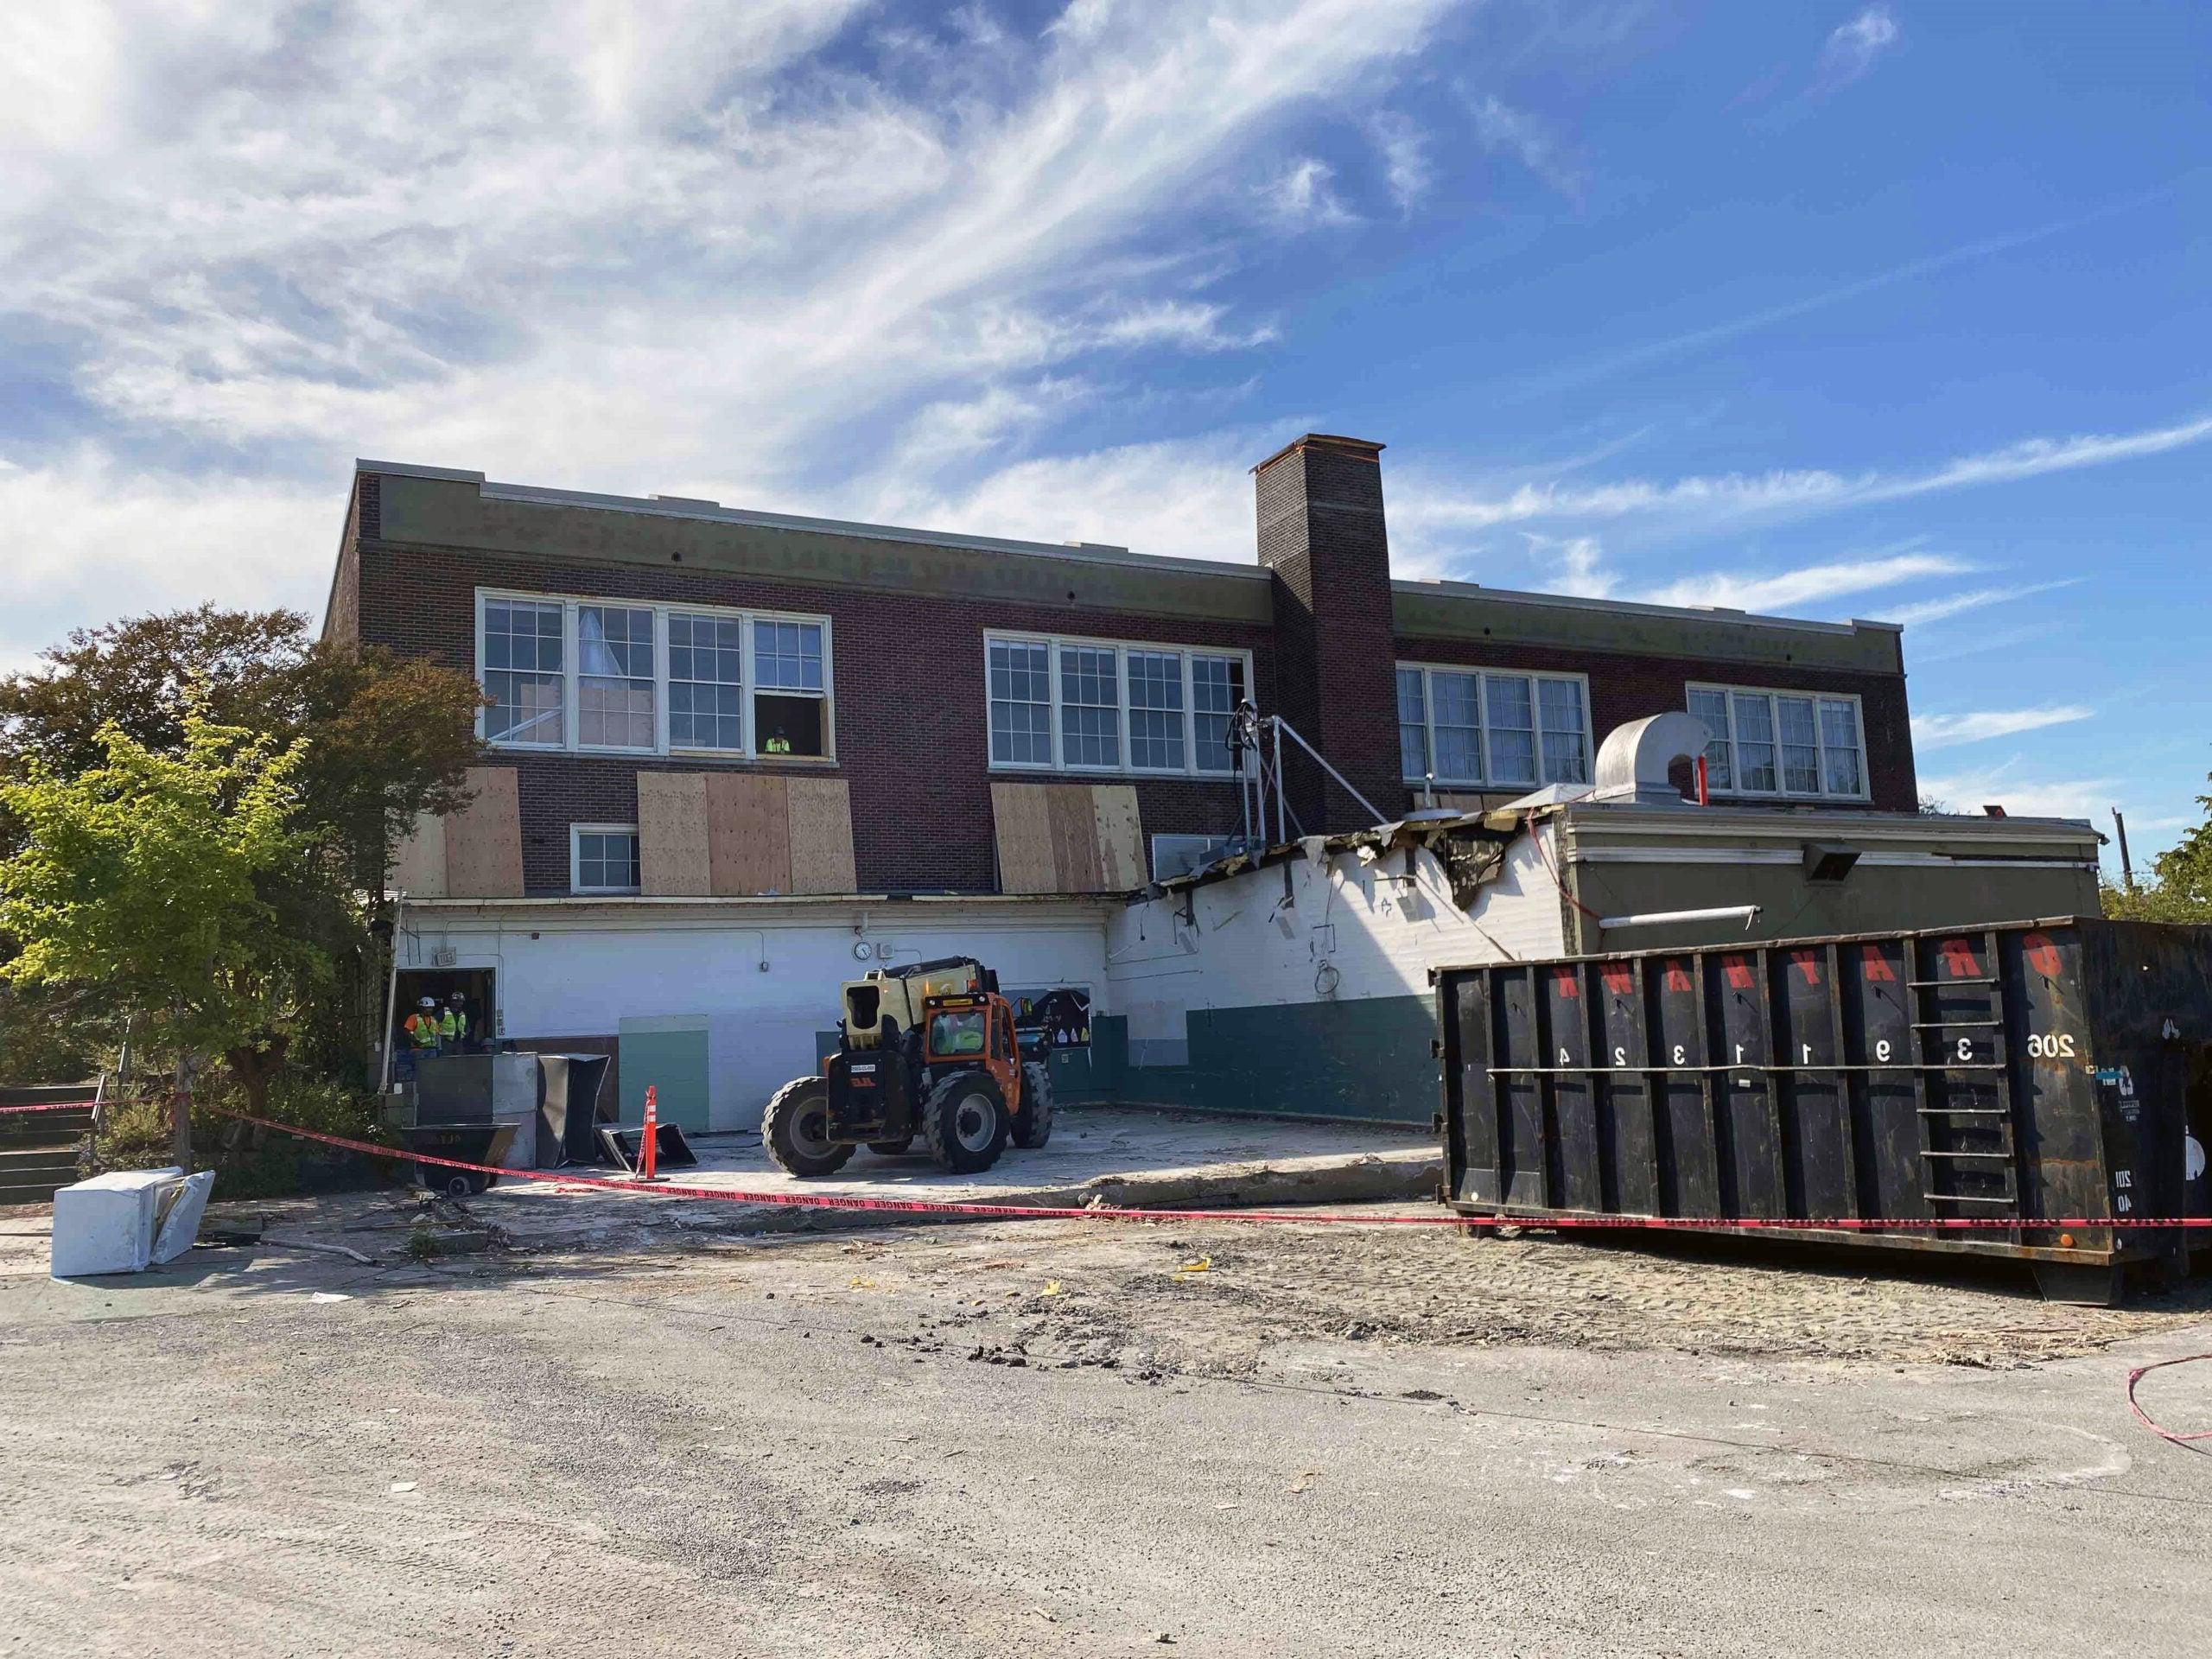 a two story brick building has windows on the top floor. an excavator is sitting below it on a concrete pad with only two walls remaining. a dumpster is next to the concrete